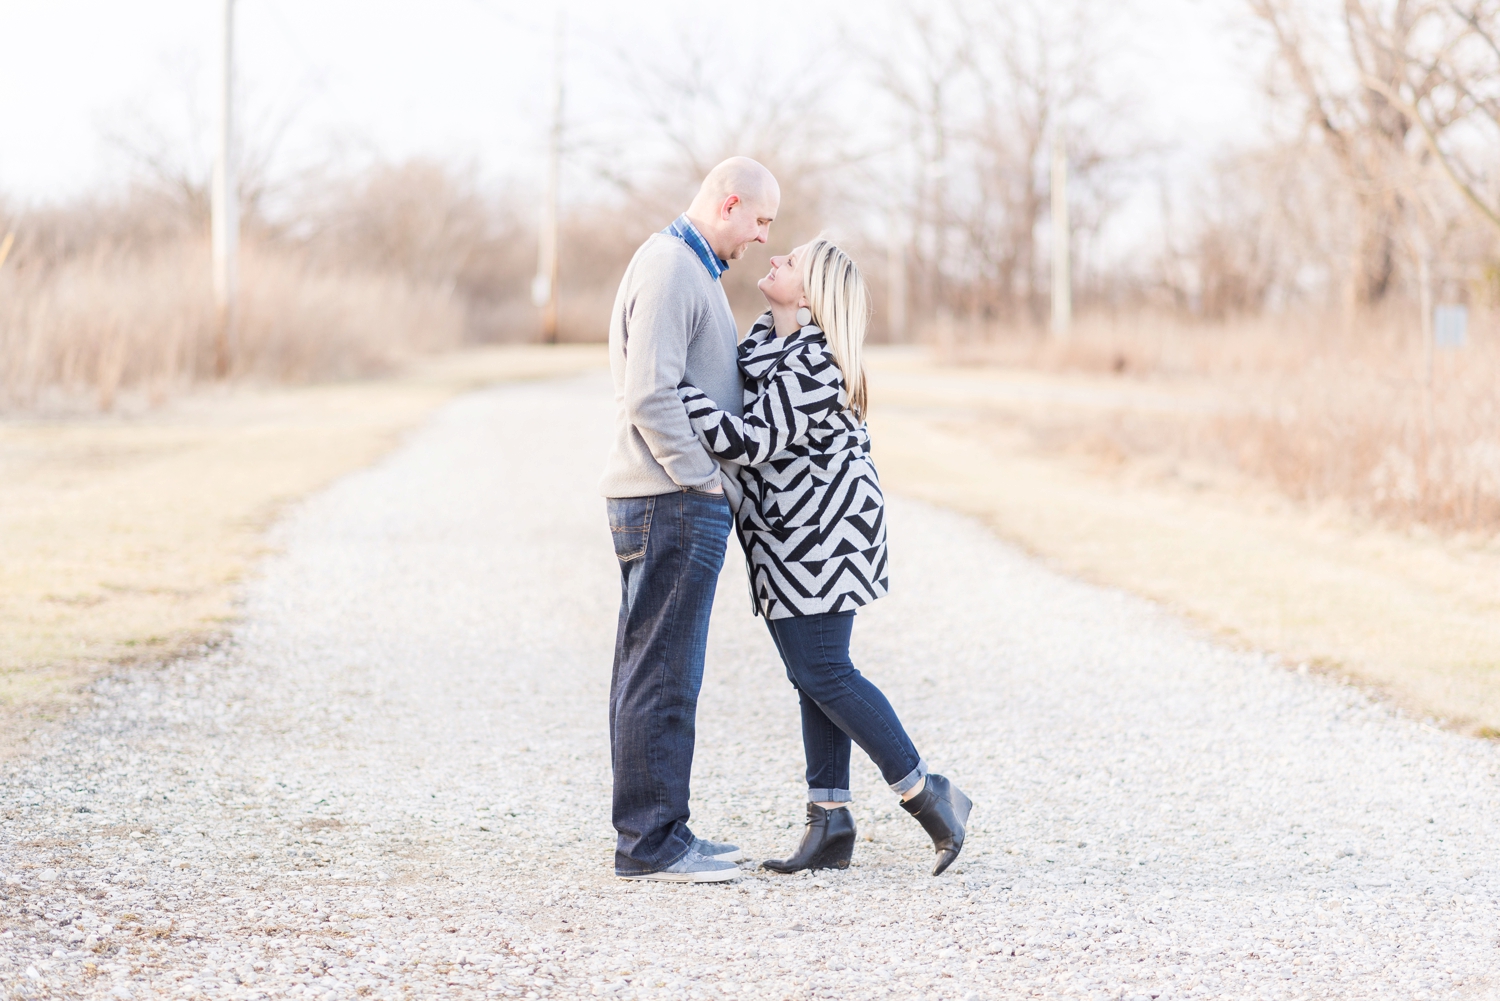 winter-engaged-couple-at-their-photo-session-at-the-scioto-audubon-park-near-grange-audubon-center-with-walkways-and-grass_0349